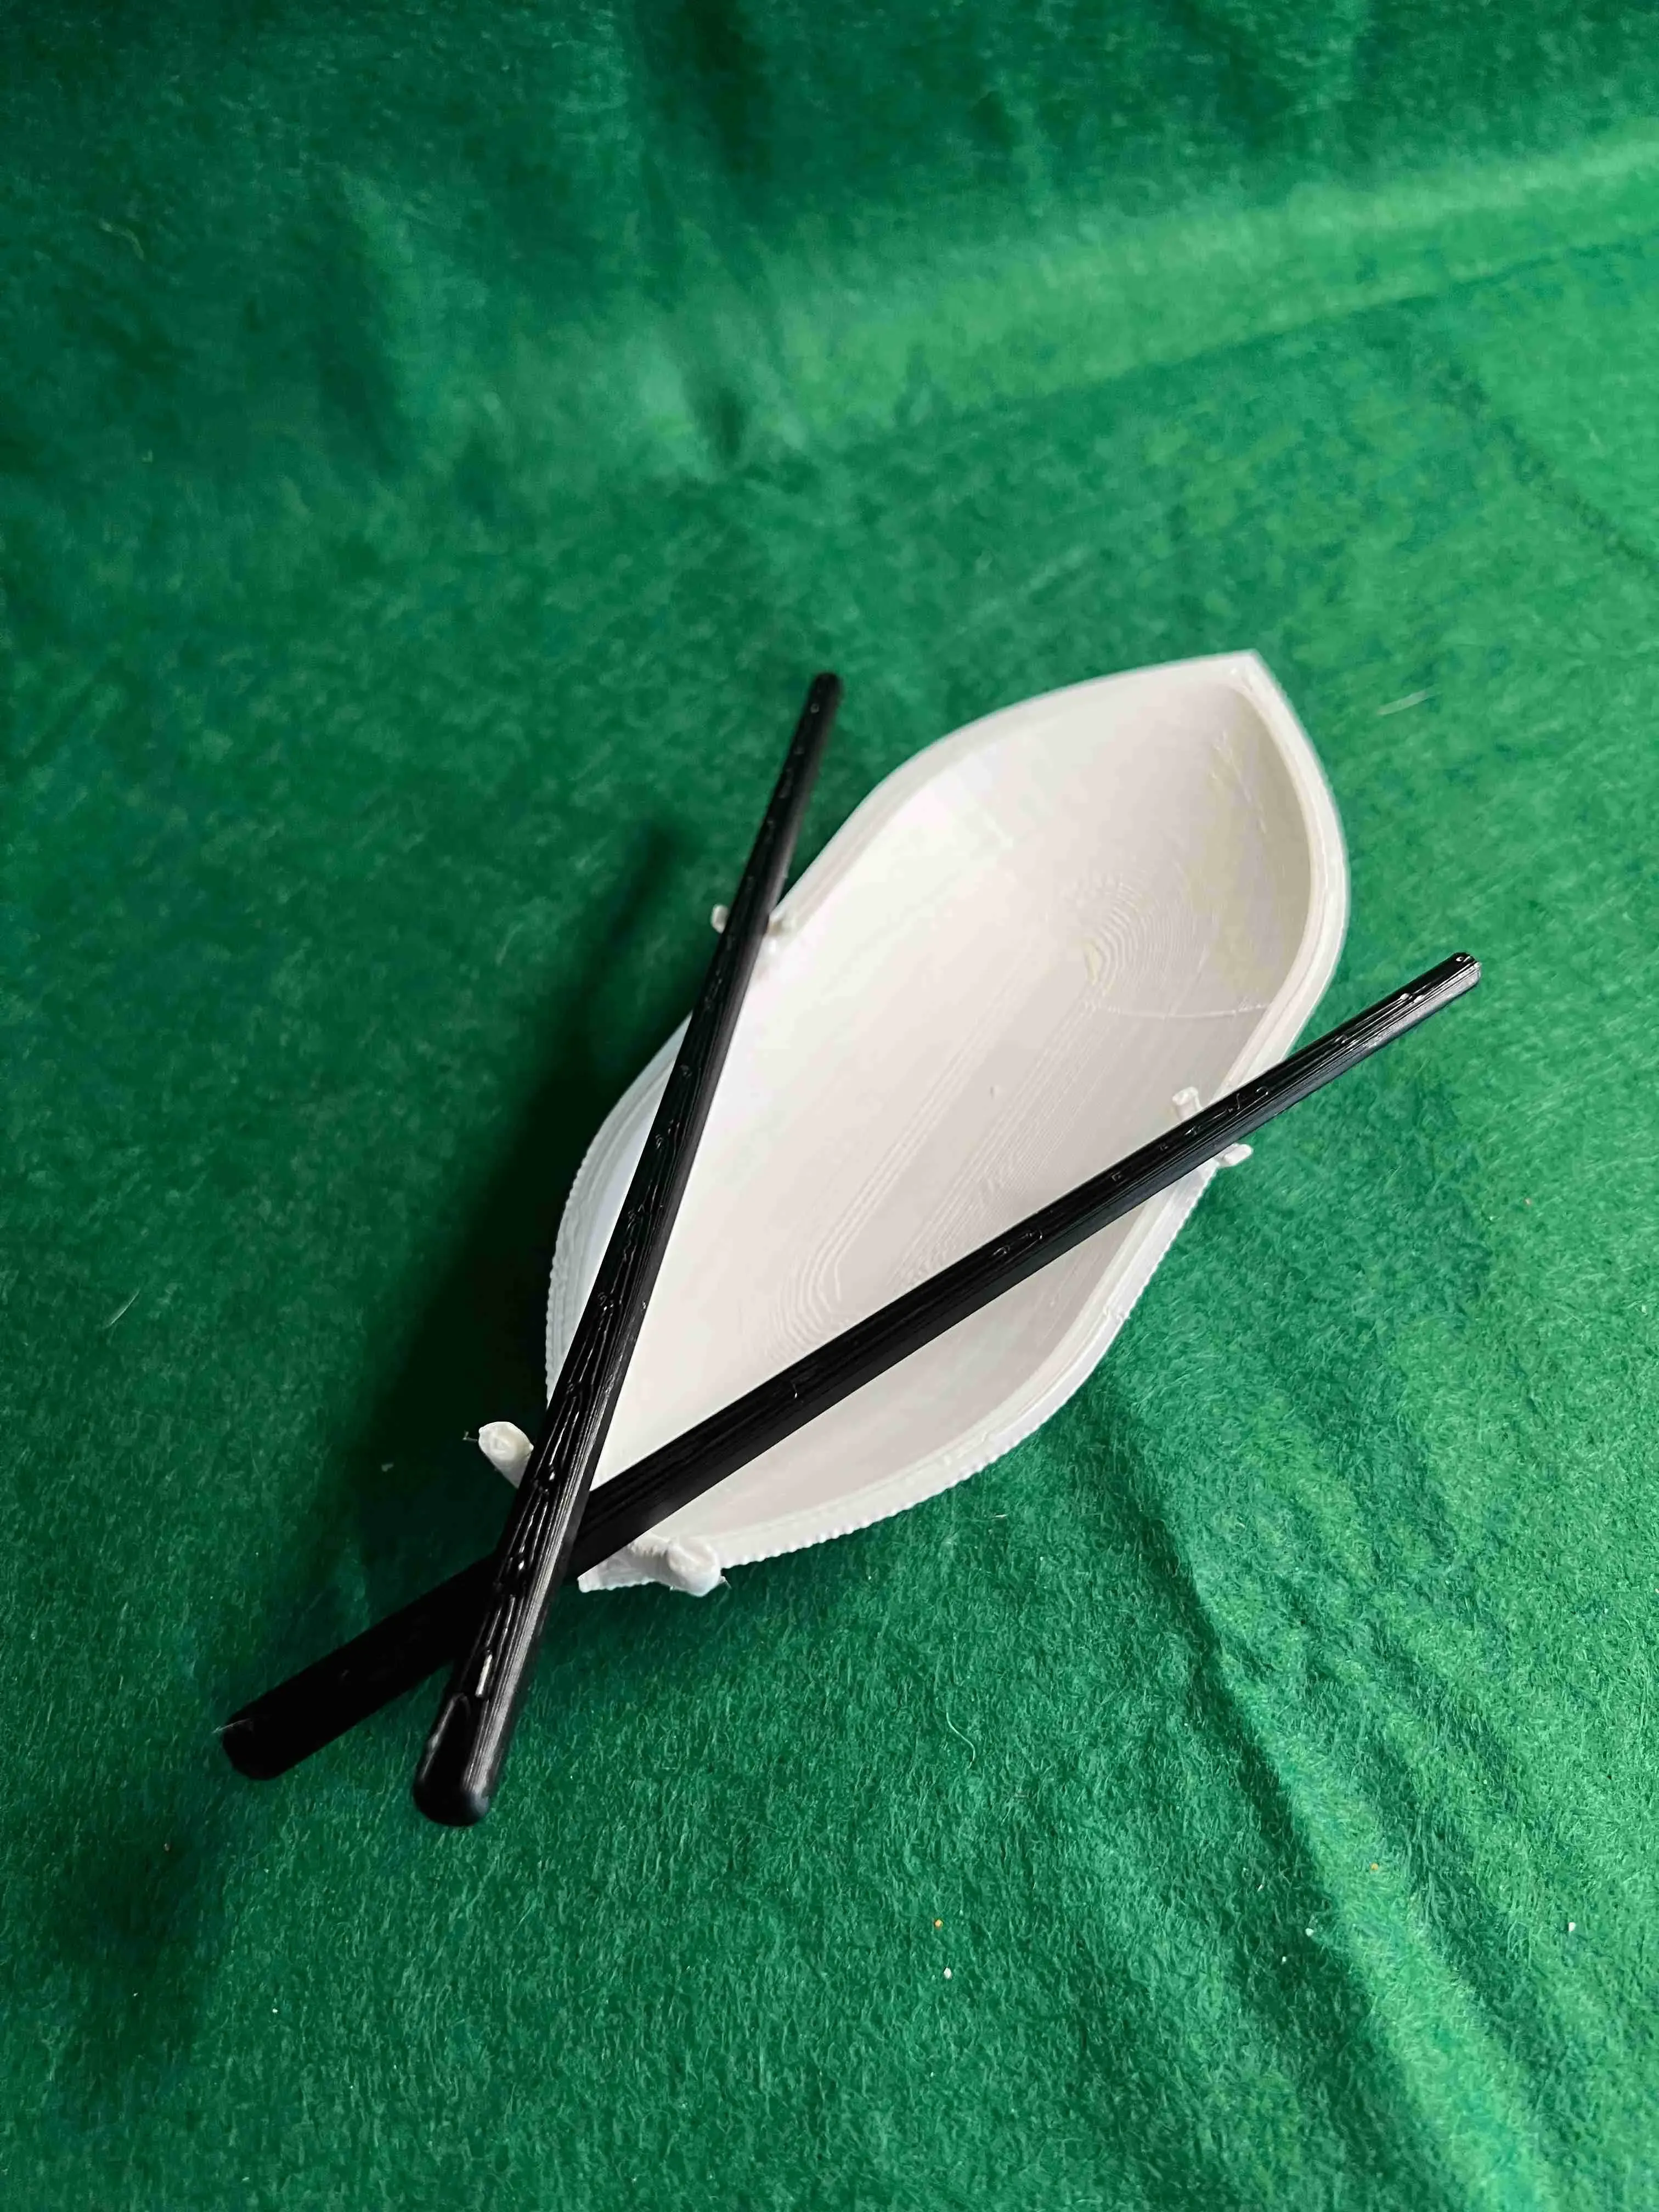 Chopstick holder with soy boat :-)